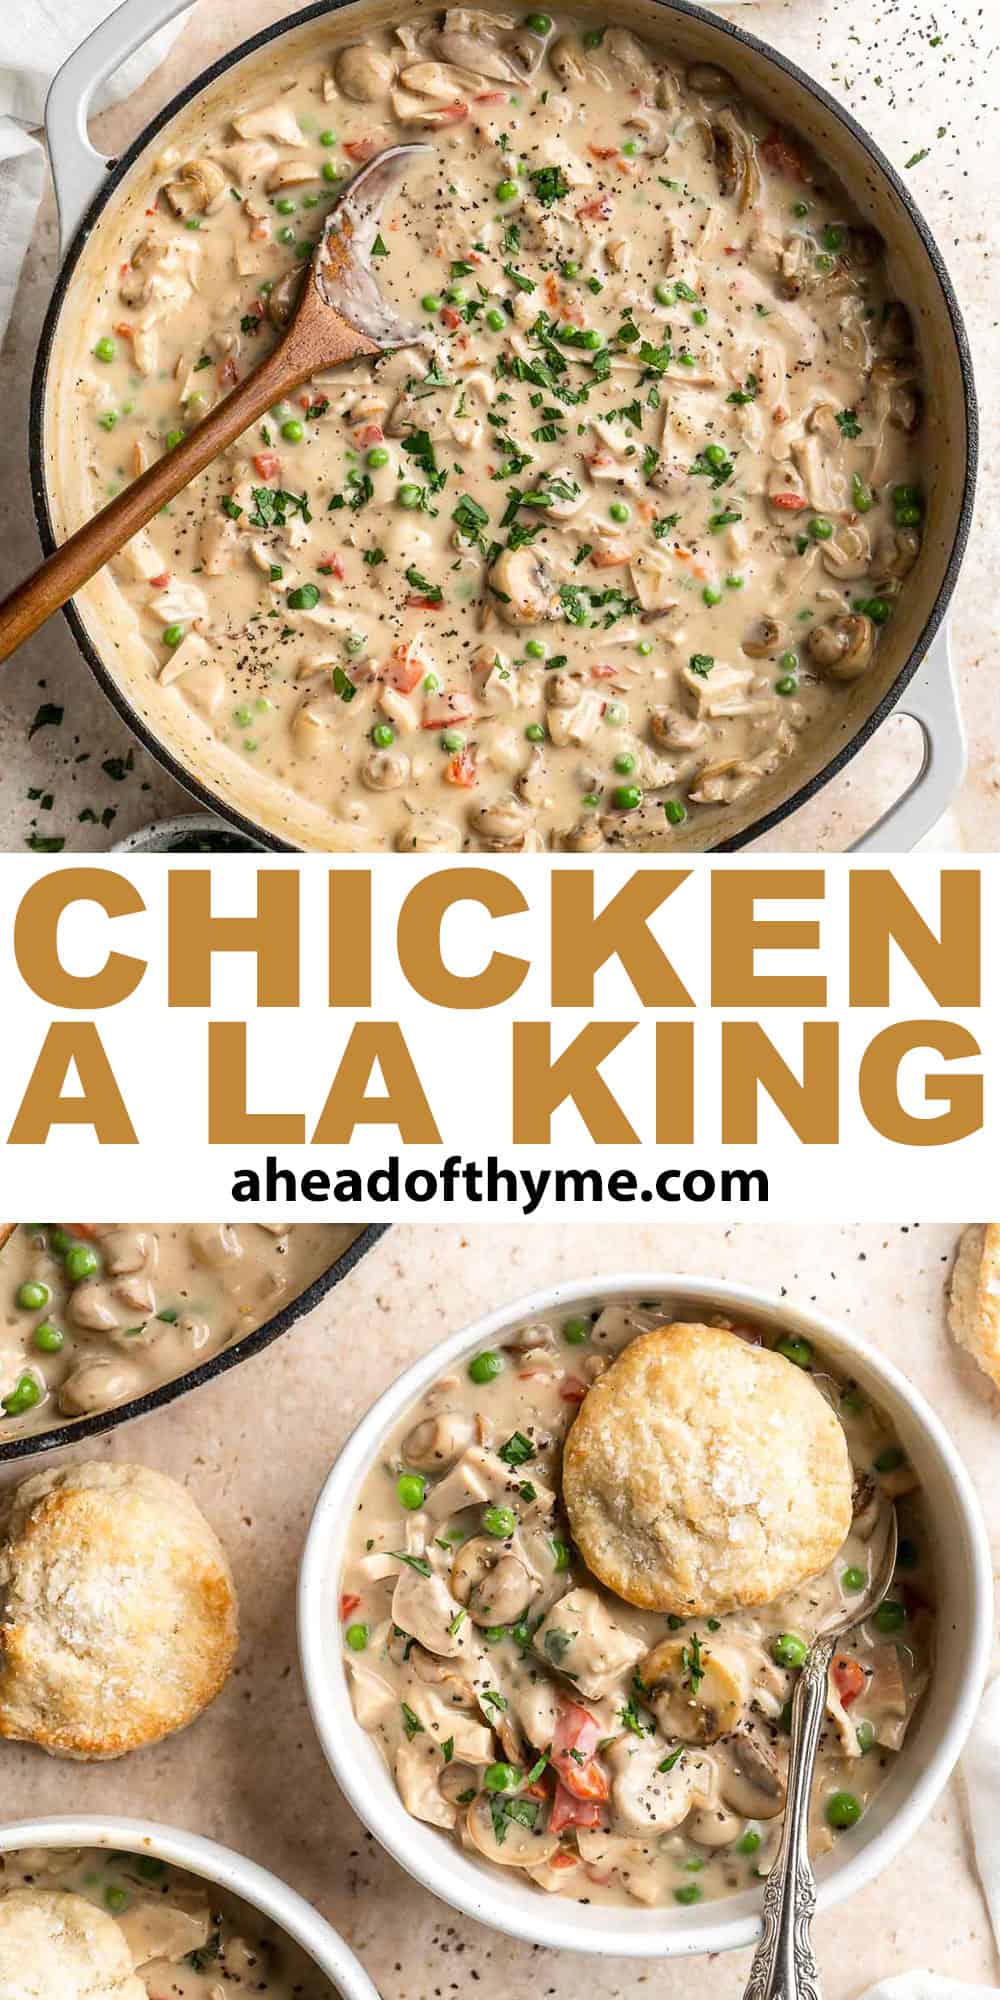 Chicken a la King is rich, creamy, and hearty comfort food. This 30-minute dinner recipe contains chicken and veggies in a cream sauce made from scratch. | aheadofthyme.com